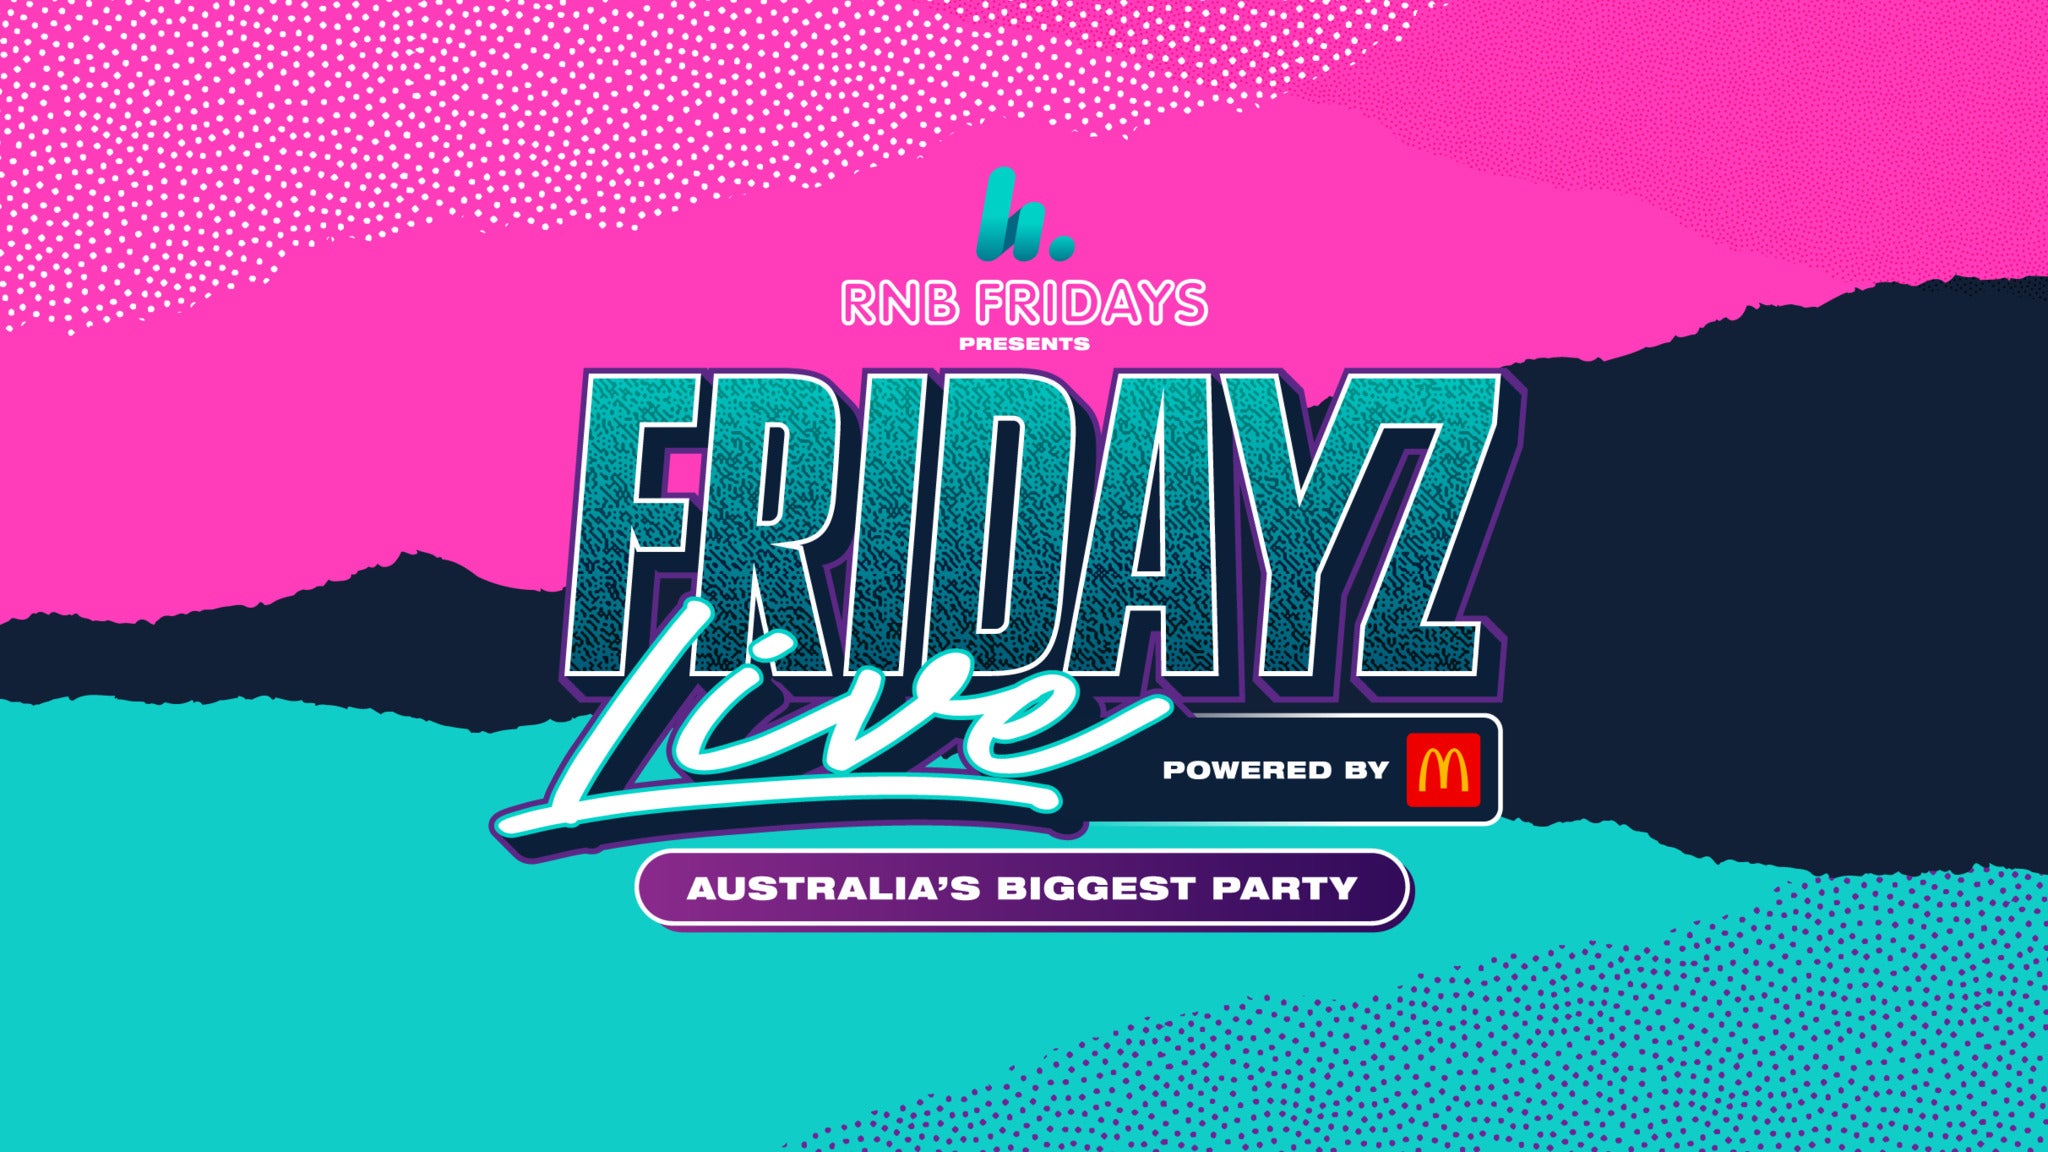 Image used with permission from Ticketmaster | Fridayz Live tickets